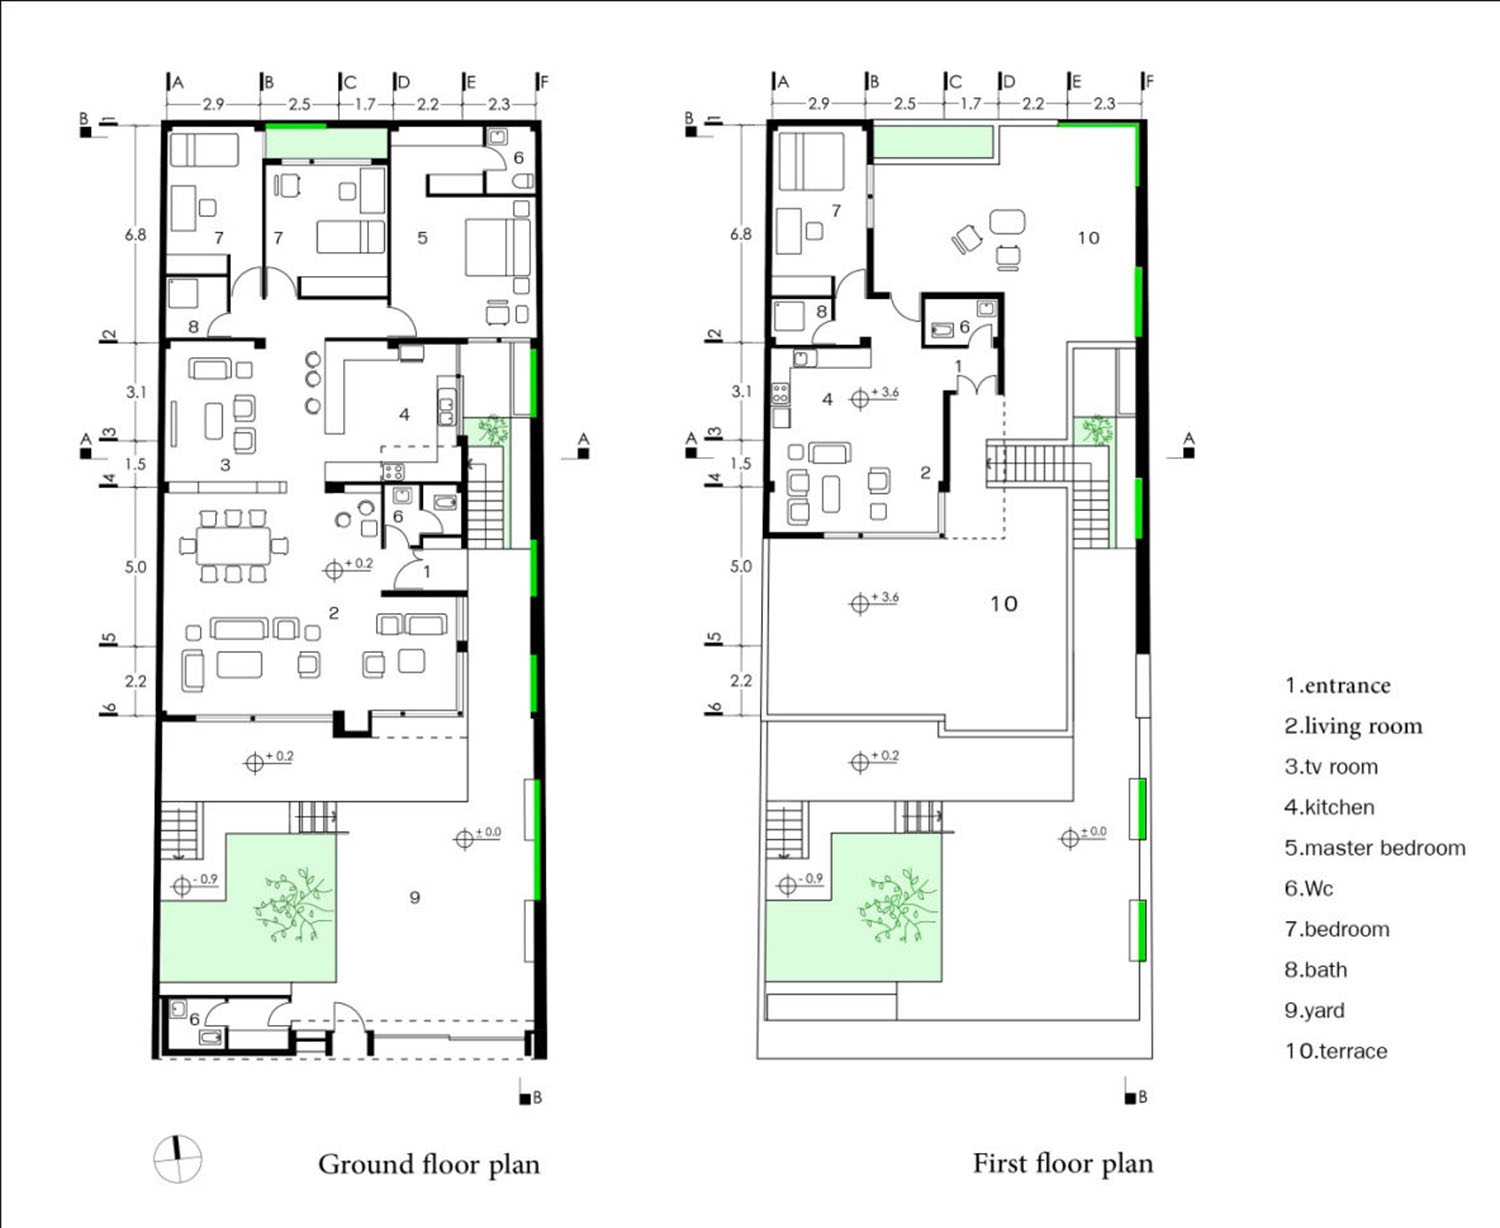 Ground floor and first floor plans